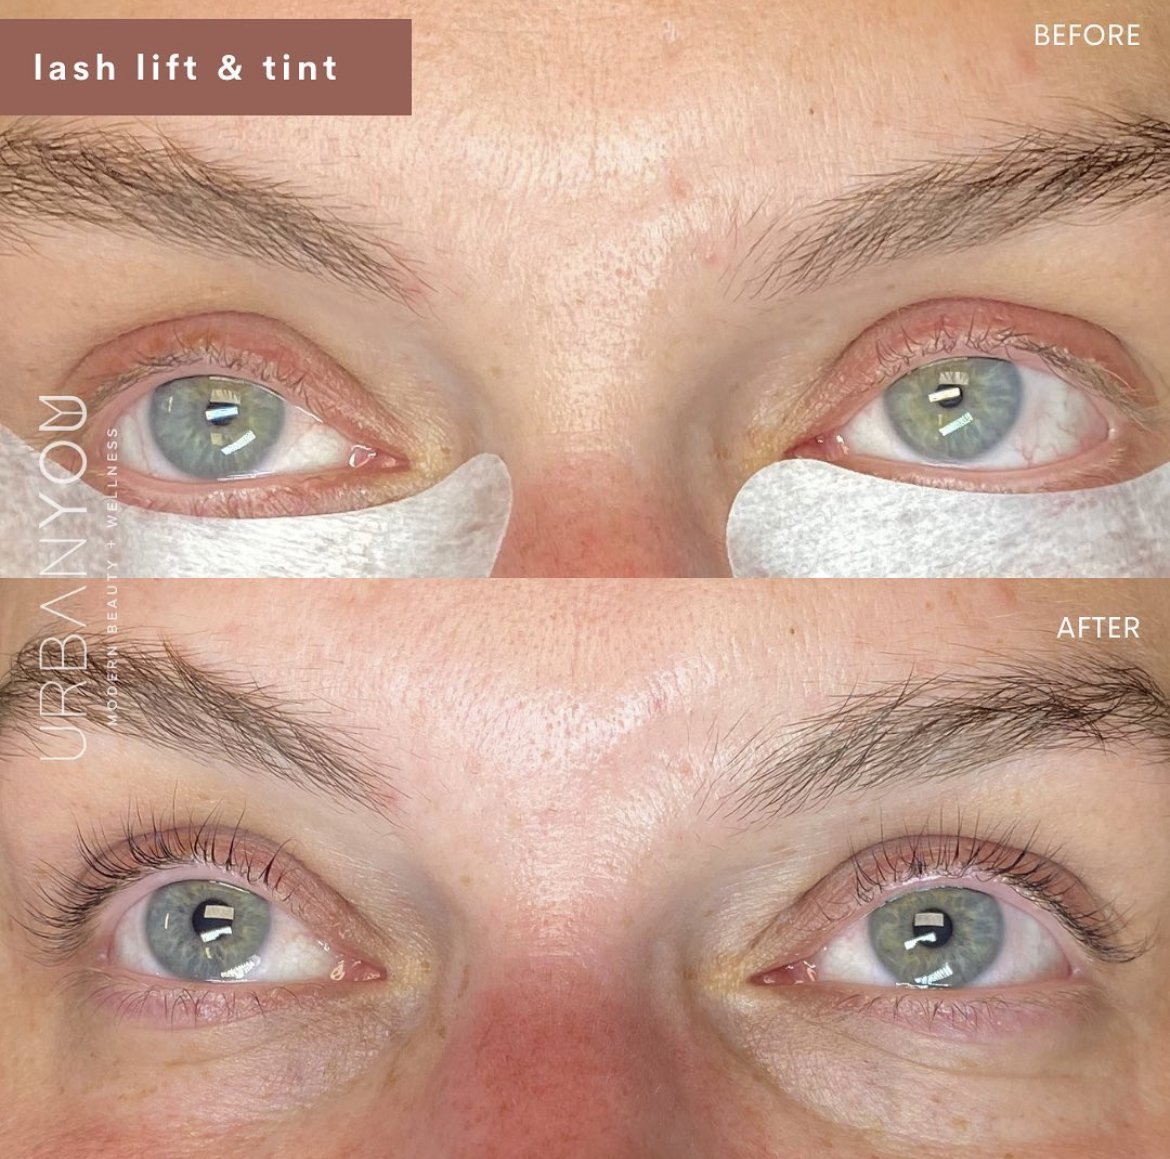 Lash Lift and Tint before and after photo at The Urban You Medical Spa in Grand Rapids (Copy)